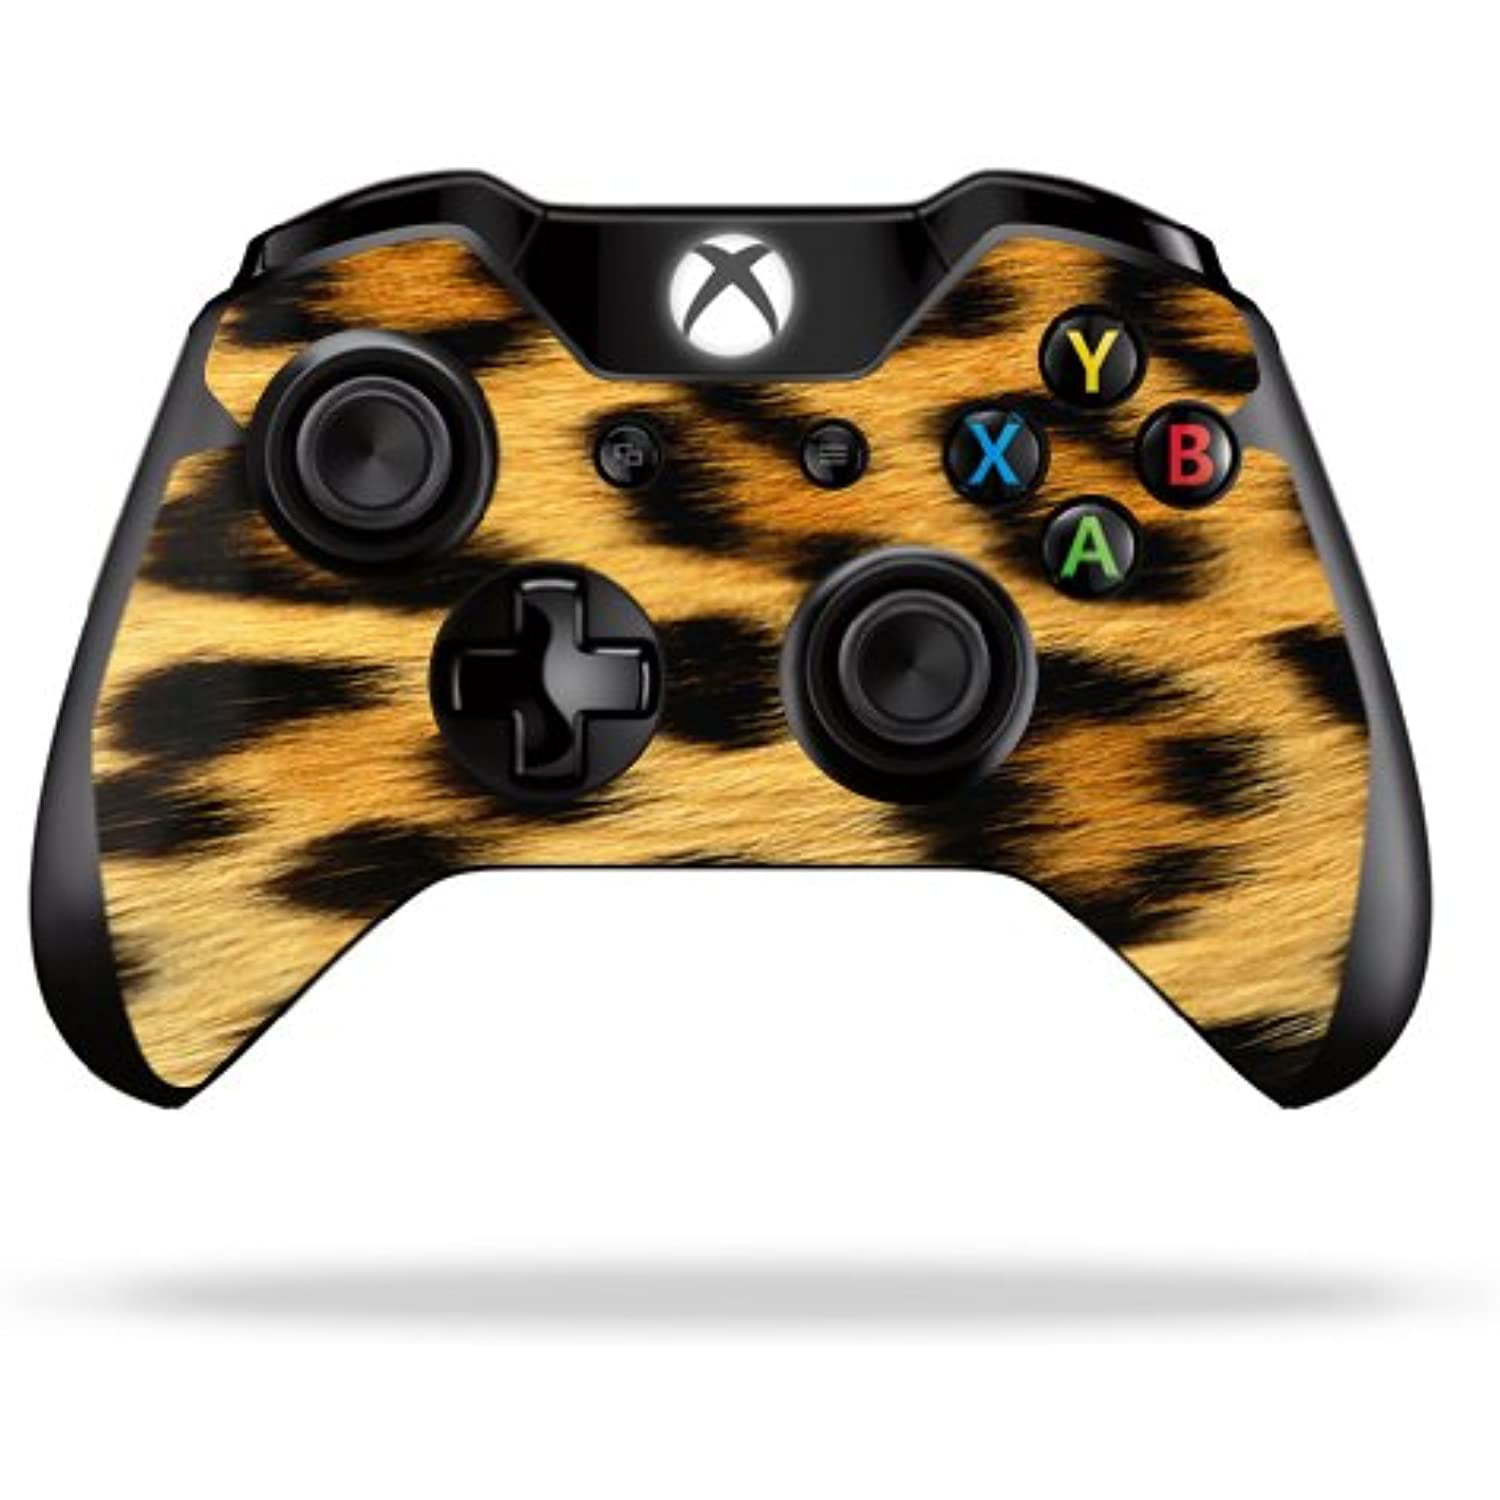 Easy to Apply Eye See You Durable and Change Styles Remove Protective MightySkins Skin Compatible with Microsoft Xbox One X Controller Made in The USA and Unique Vinyl Decal wrap Cover 